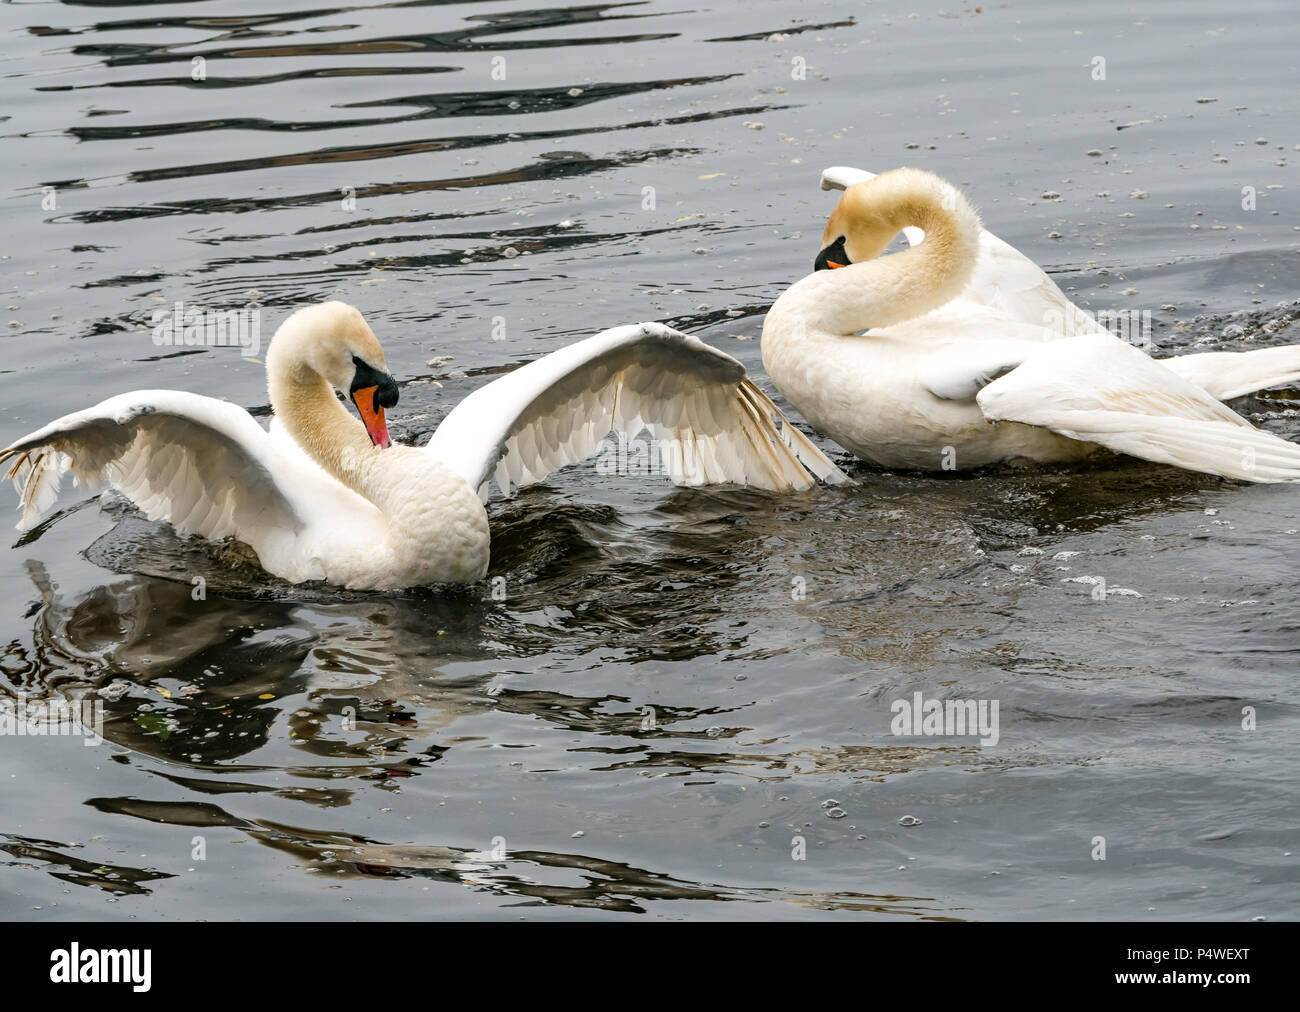 Two adult mute swans, Cygnus olor, in courtship ritual, imitating each other’s movements and flapping wings, Water of Leith, Edinburgh, Scotland, UK Stock Photo